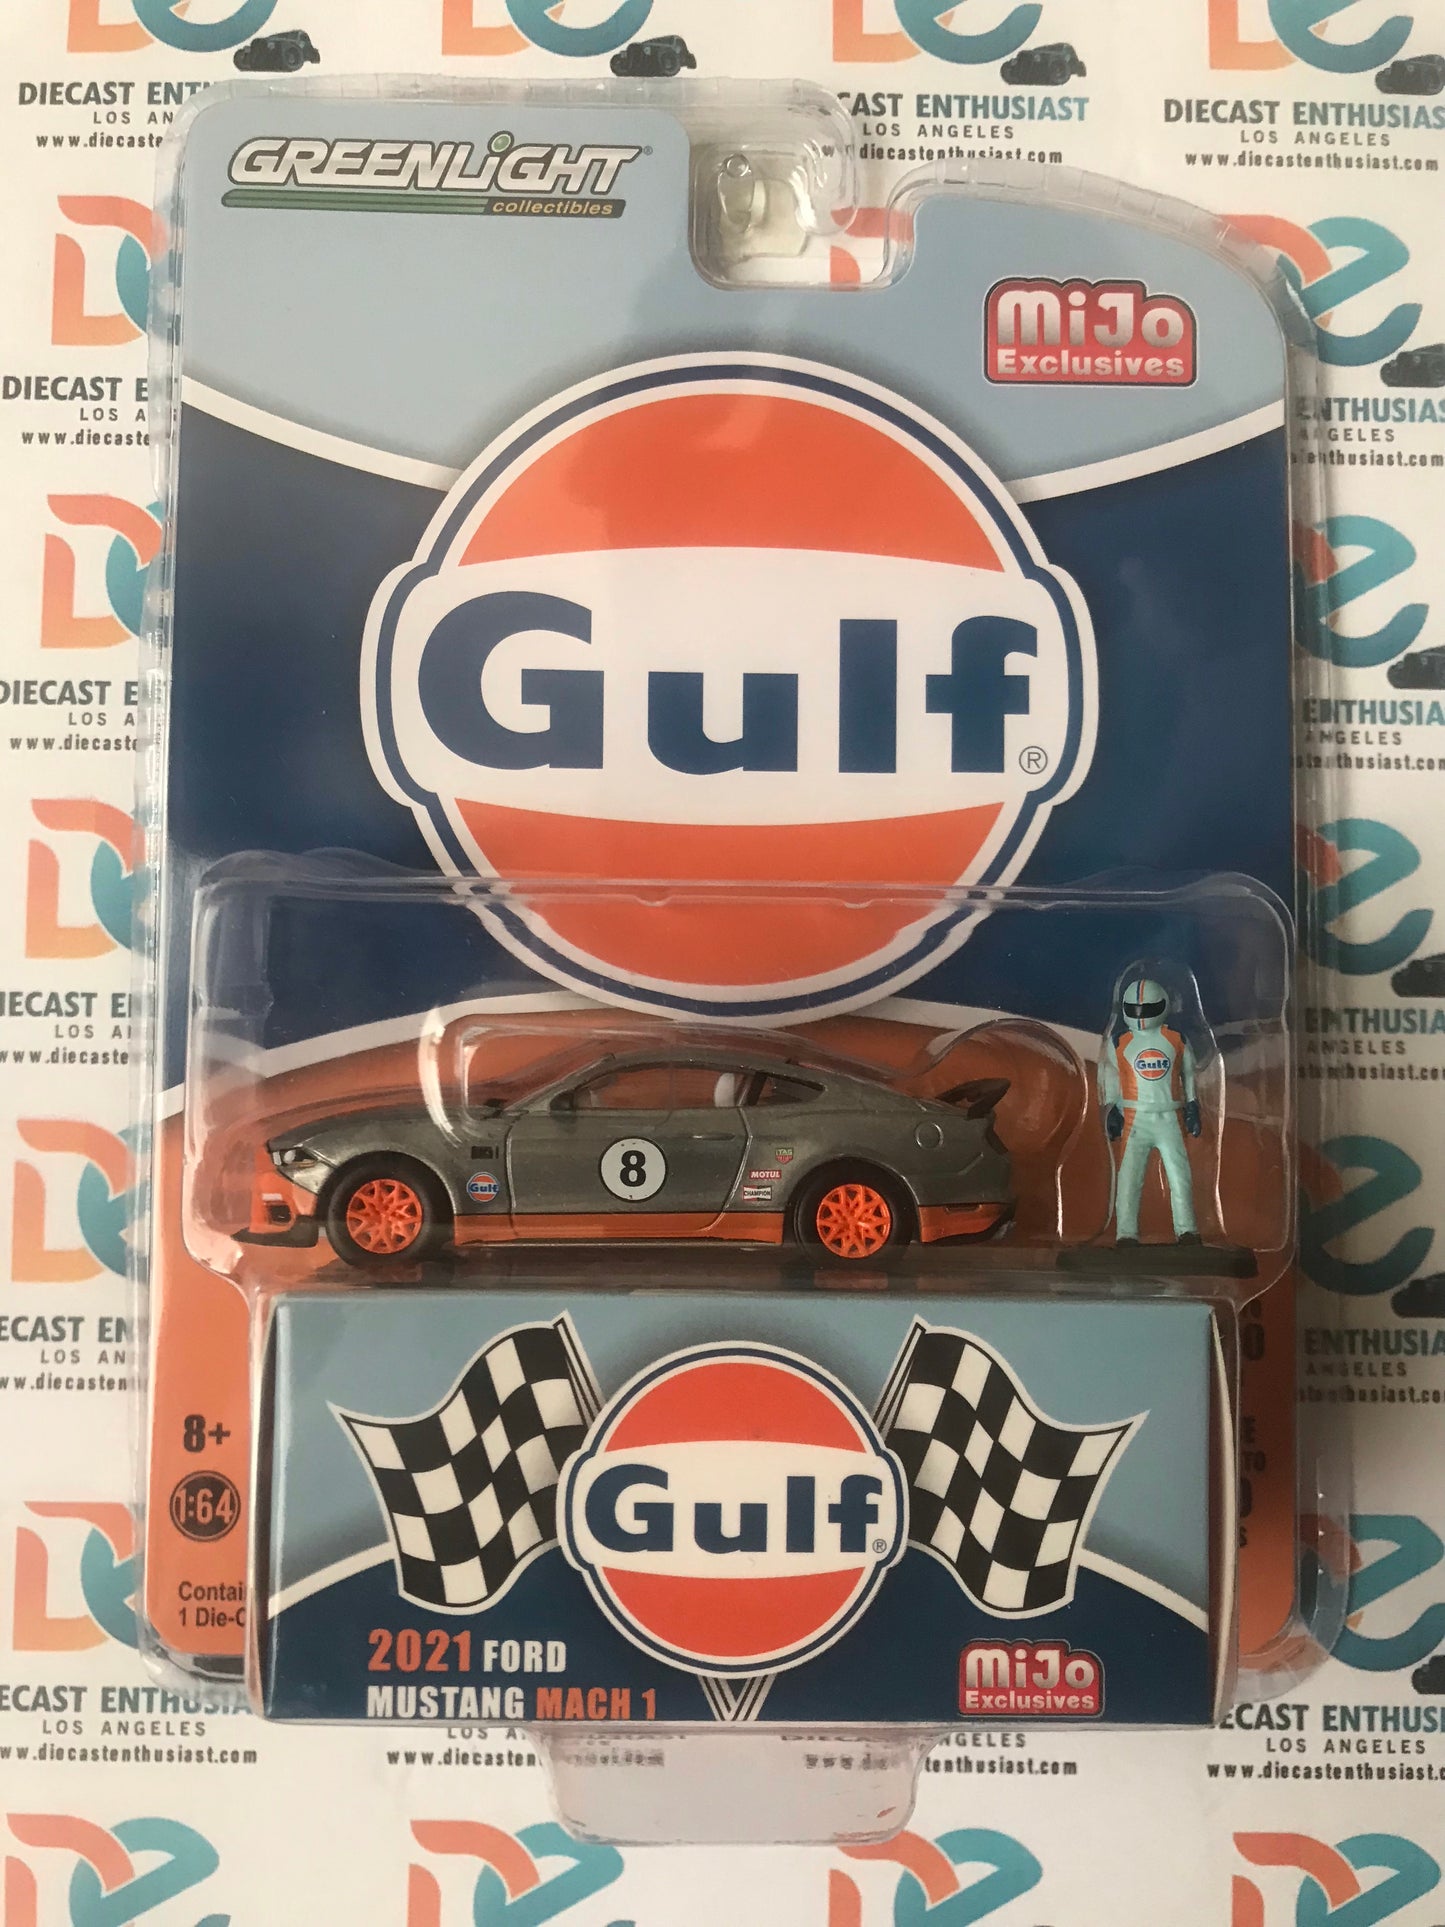 CHASE Greenlight Mijo Exclusives 2021 Ford Mustang Mach 1 Gulf Racing with Figure 1:64